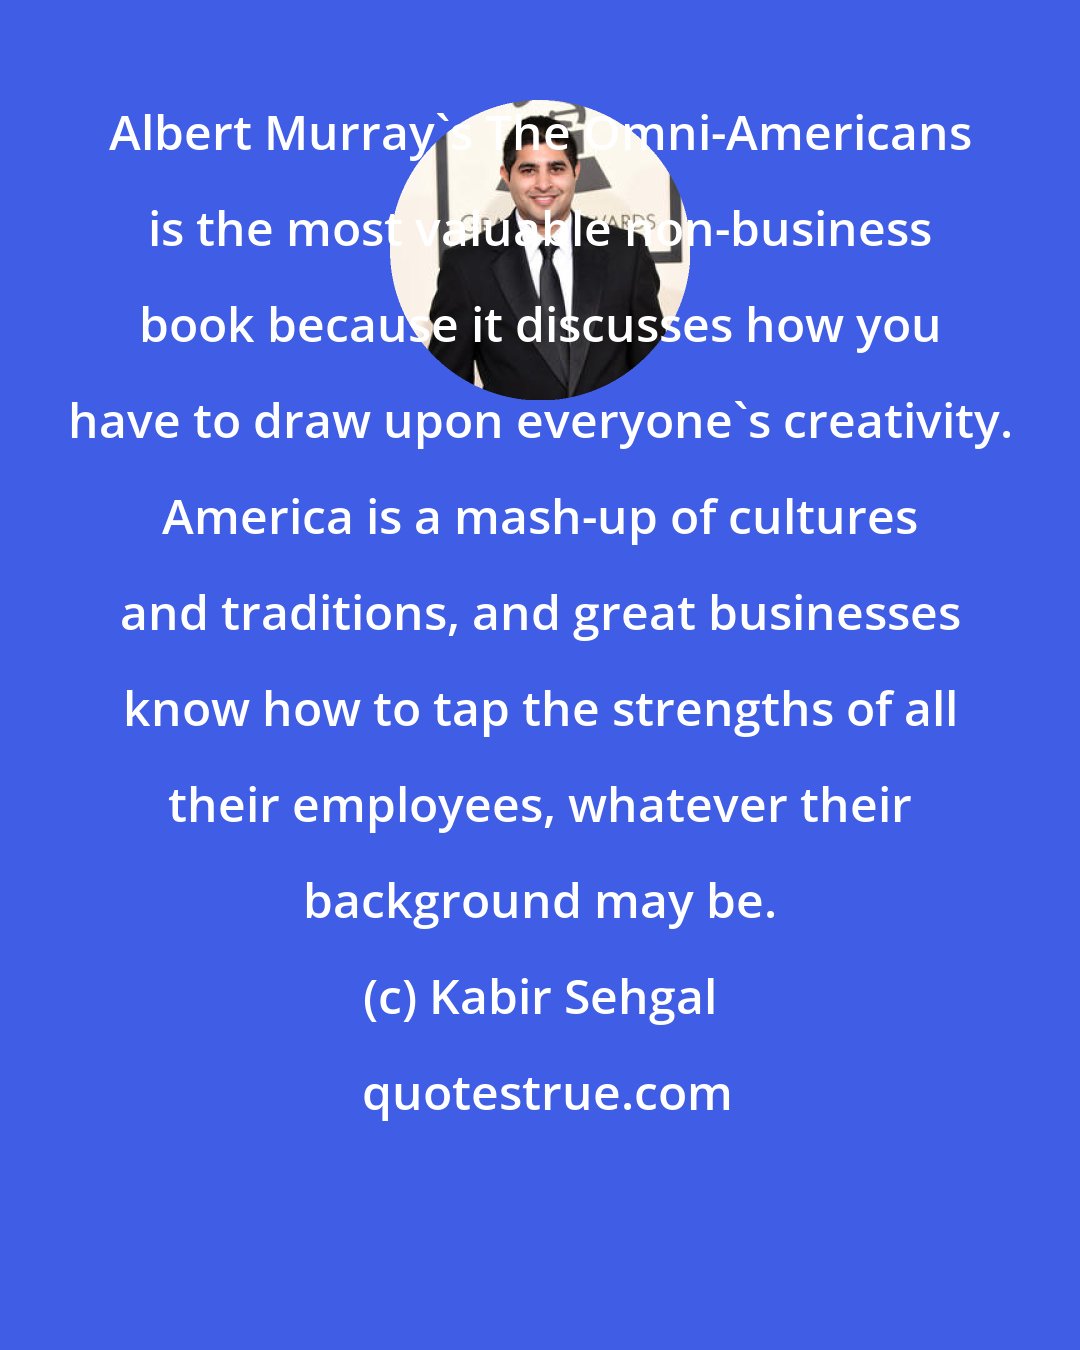 Kabir Sehgal: Albert Murray's The Omni-Americans is the most valuable non-business book because it discusses how you have to draw upon everyone's creativity. America is a mash-up of cultures and traditions, and great businesses know how to tap the strengths of all their employees, whatever their background may be.